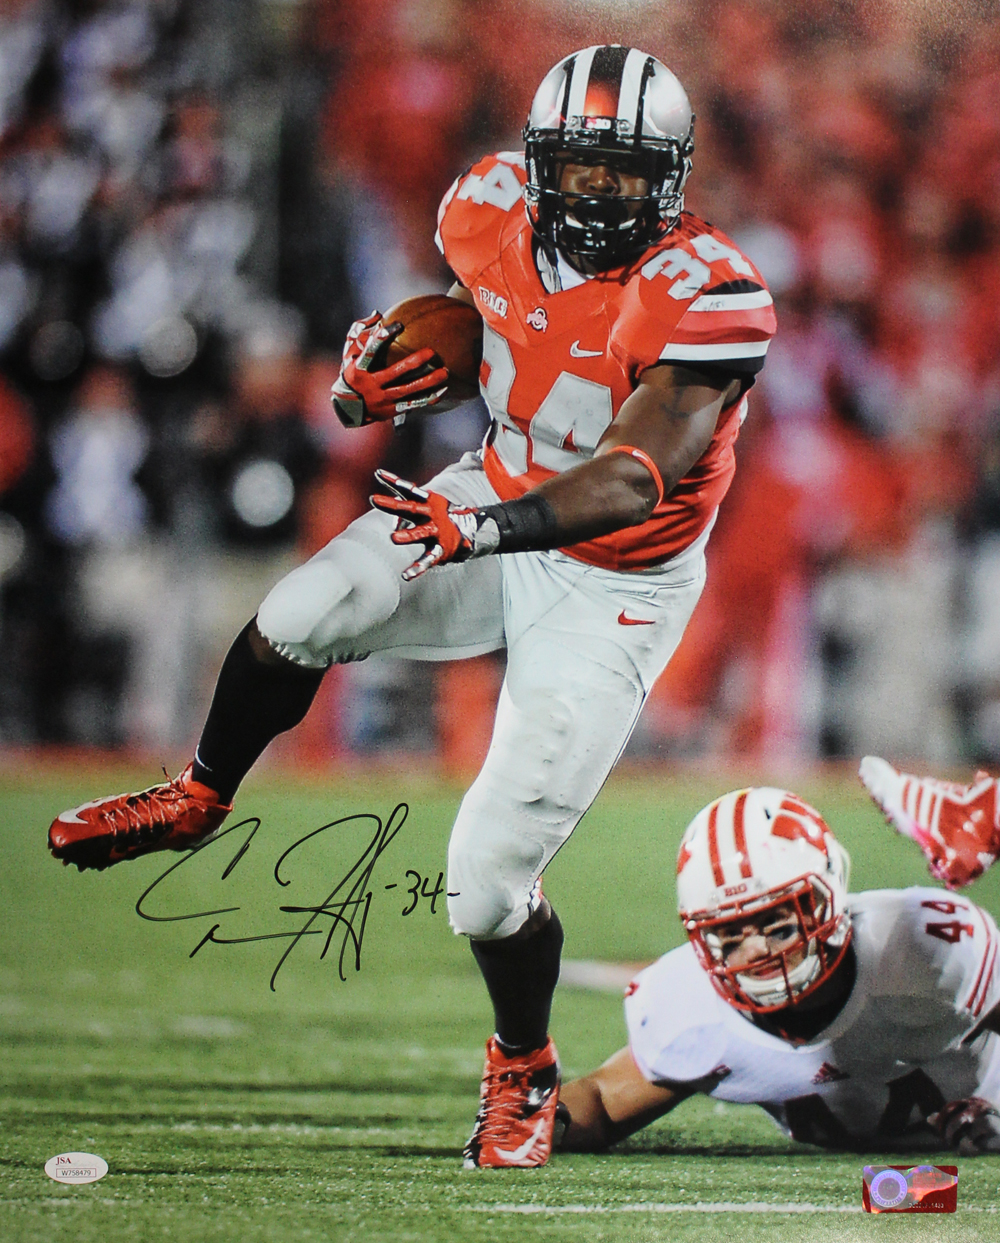 Carlos Hyde Autographed/Signed Ohio State Buckeyes 16x20 Photo JSA